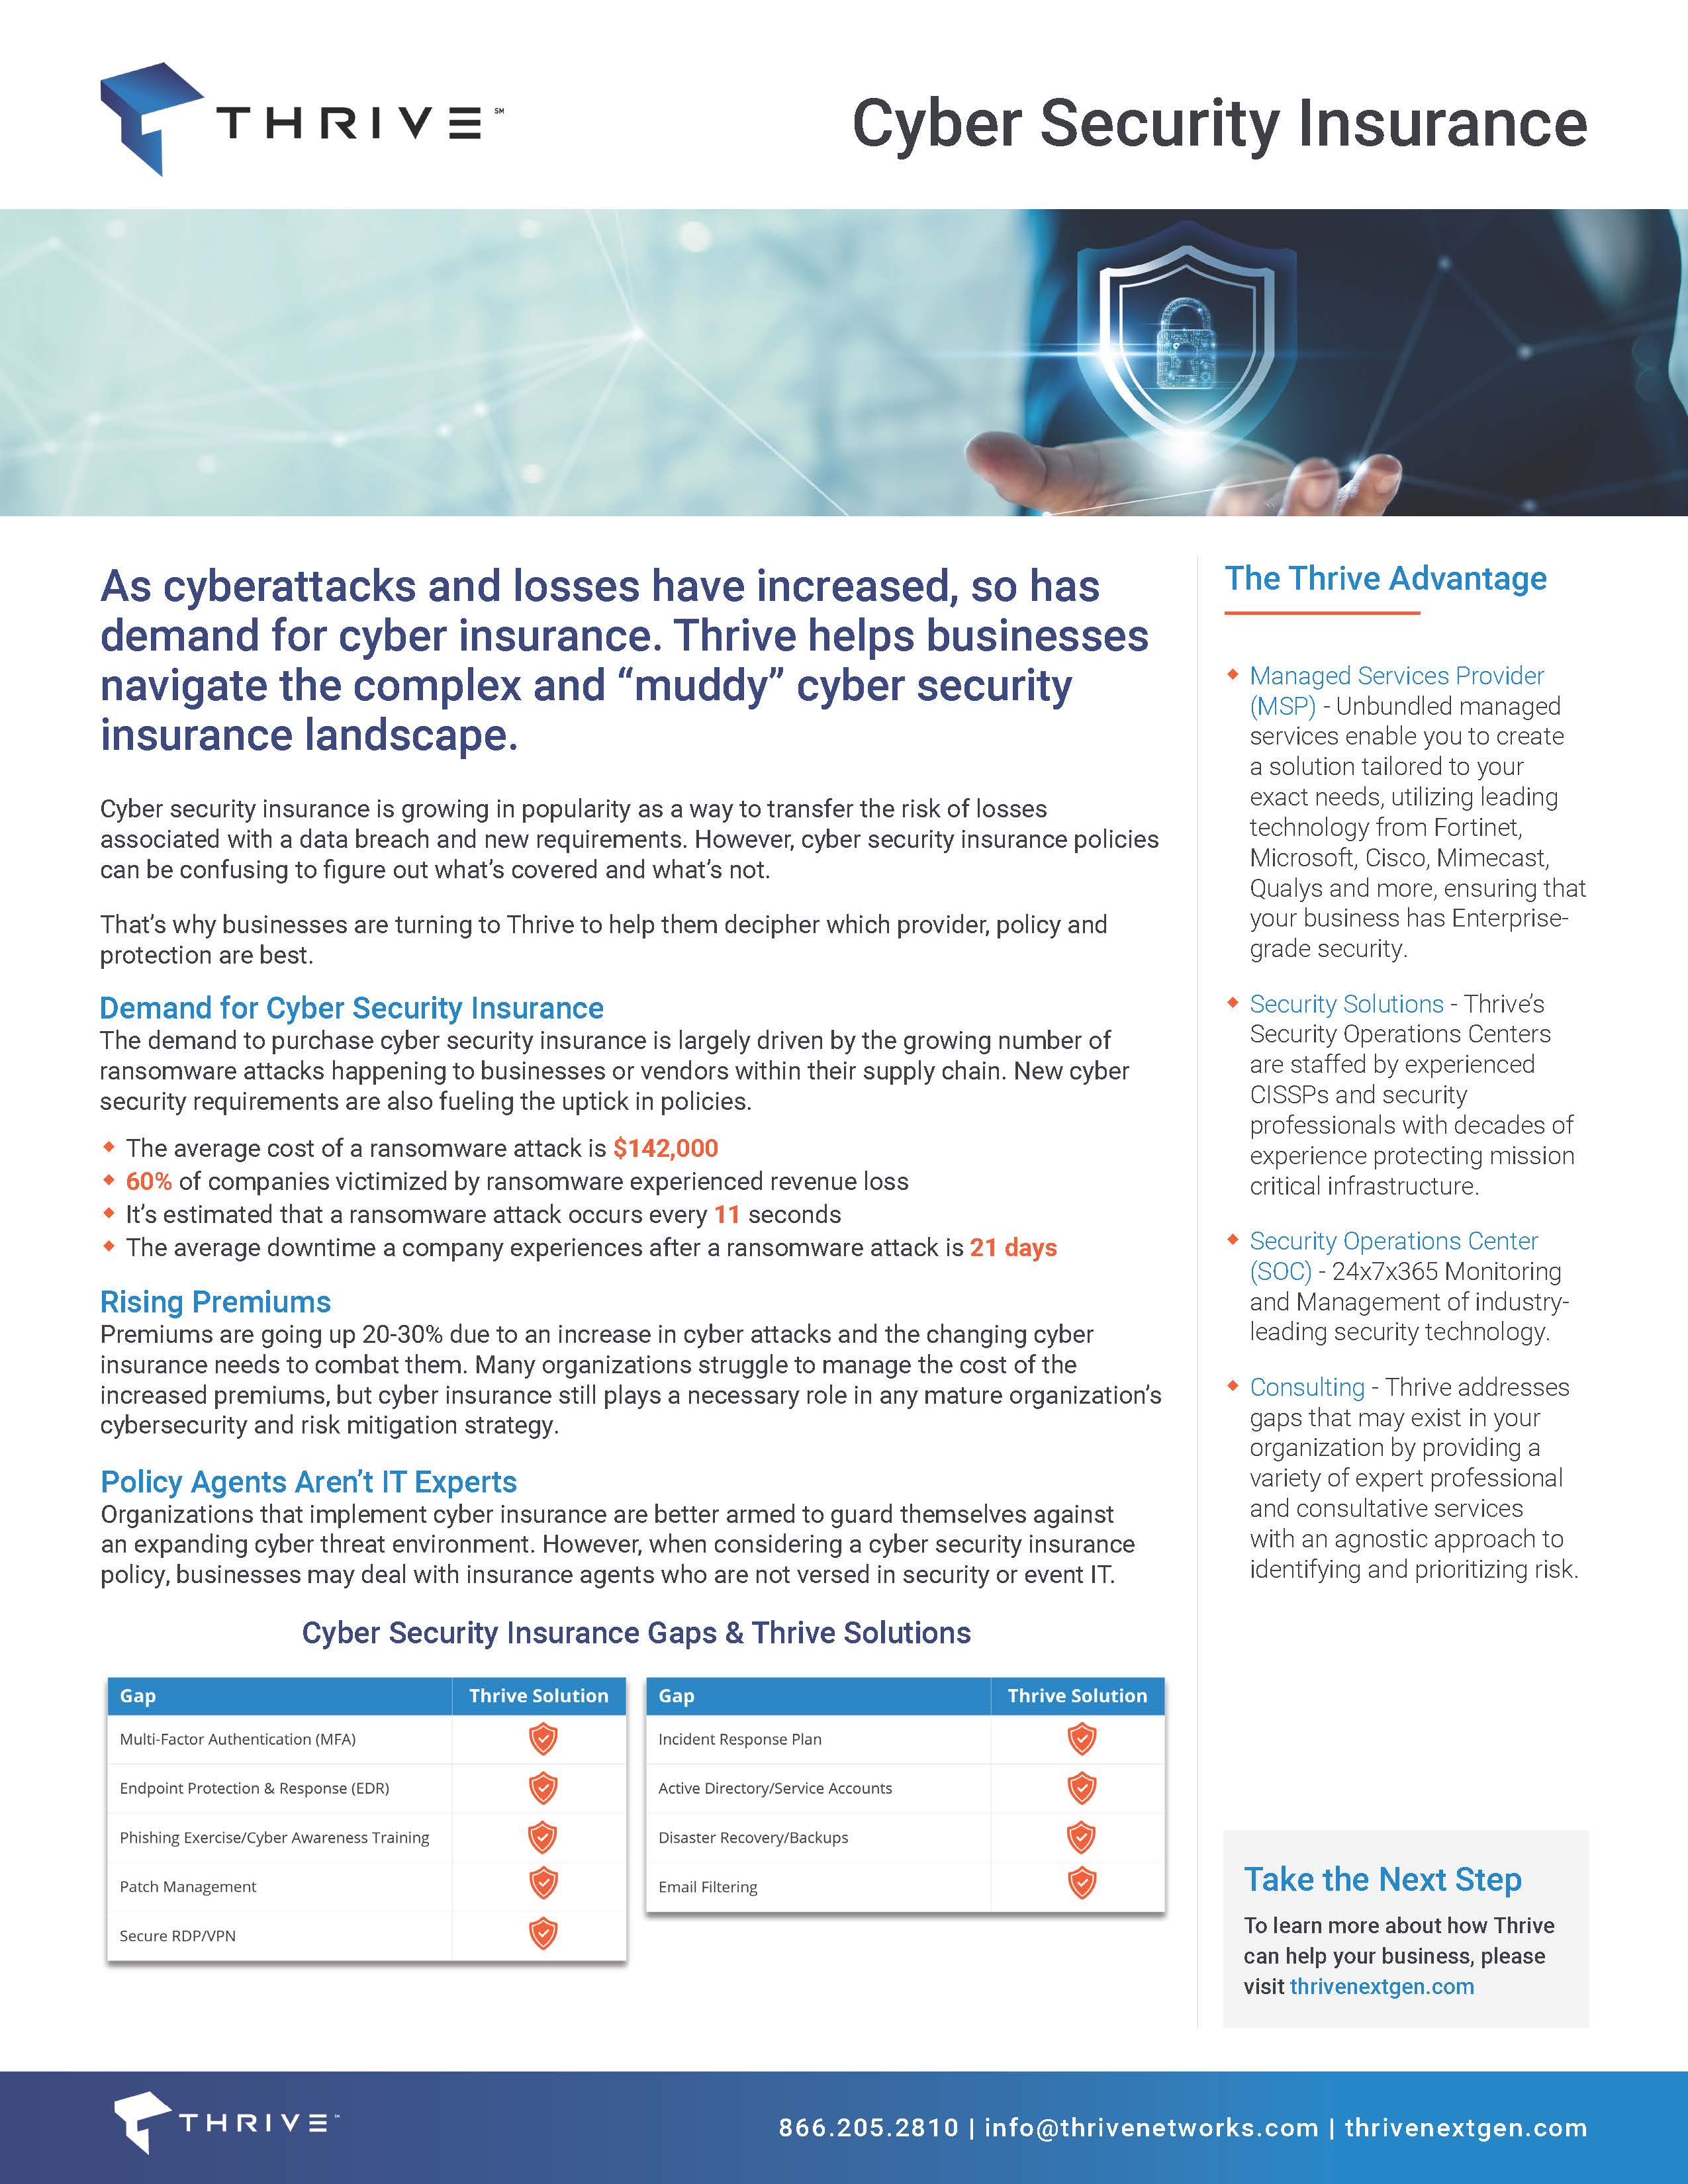 Thrive_Cyber Security Insurance_One Pager 120221